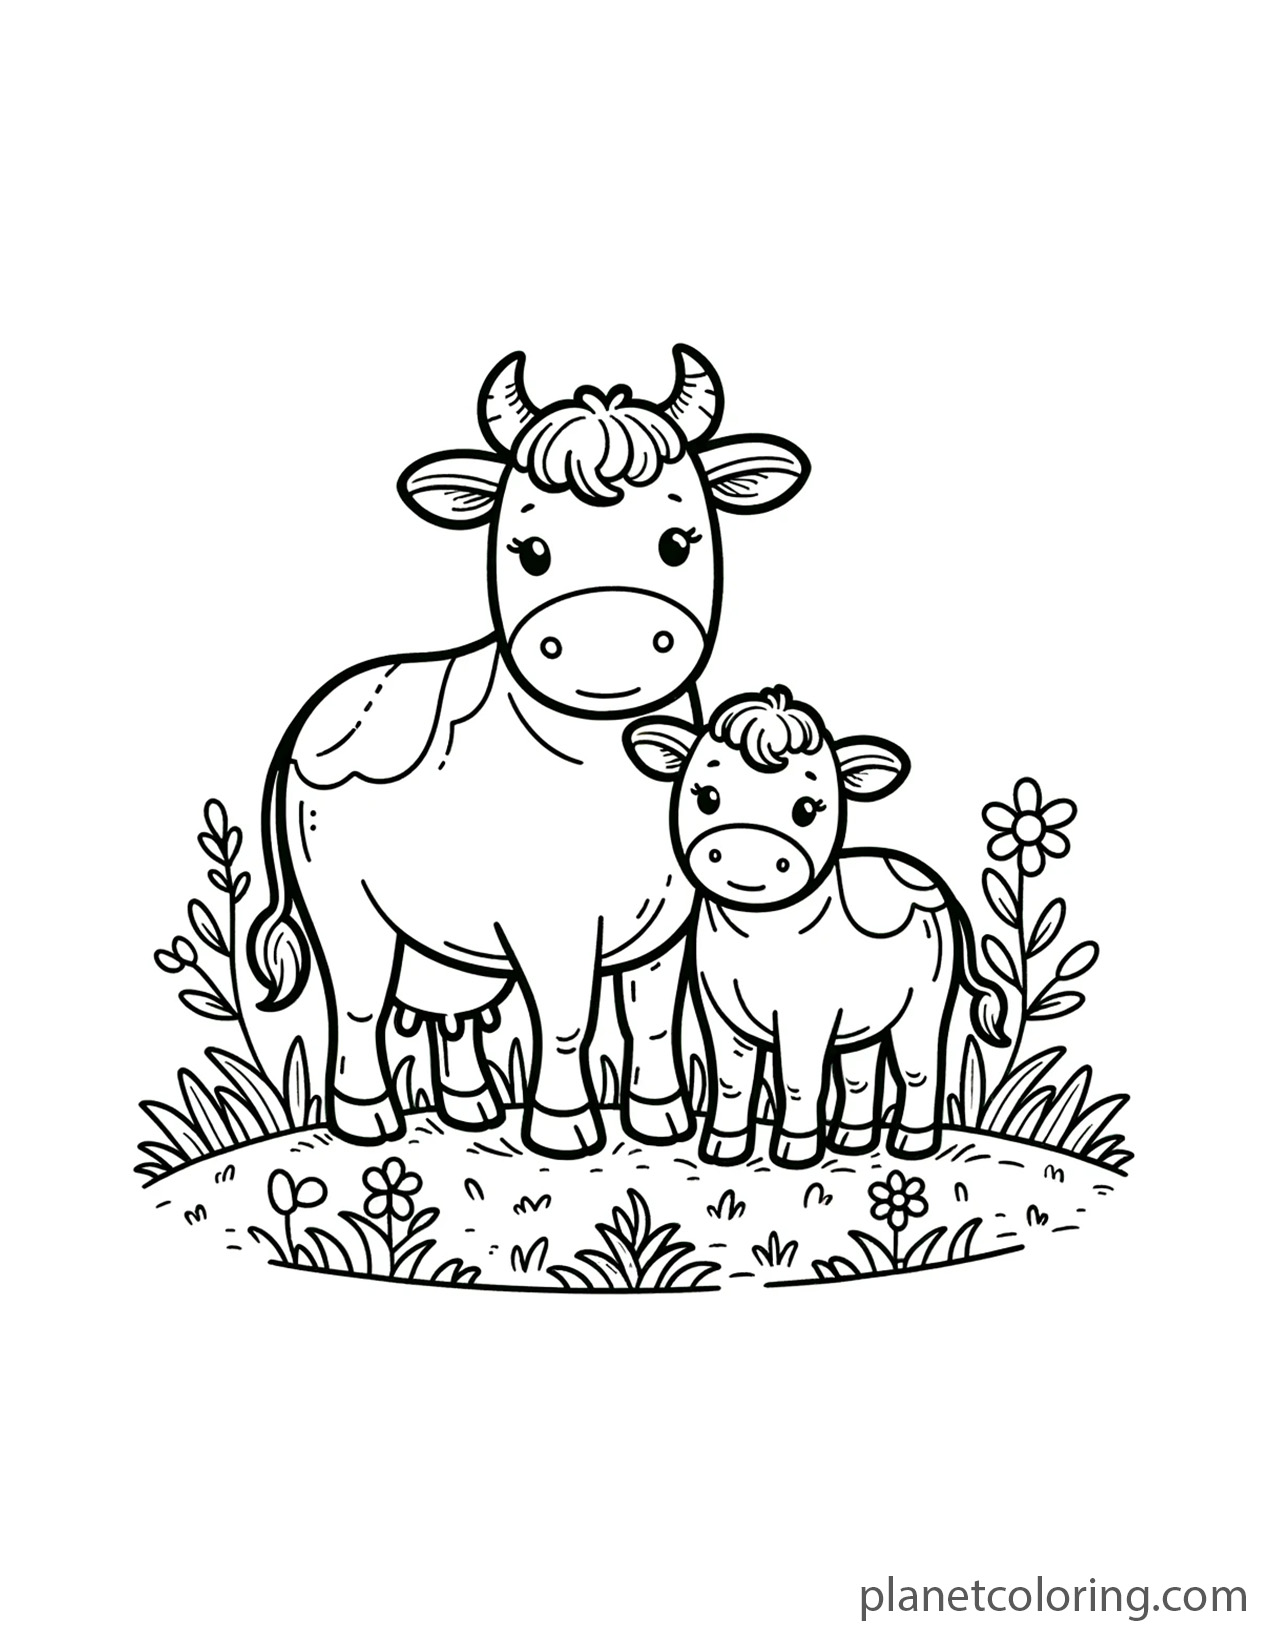 Cow with a calf